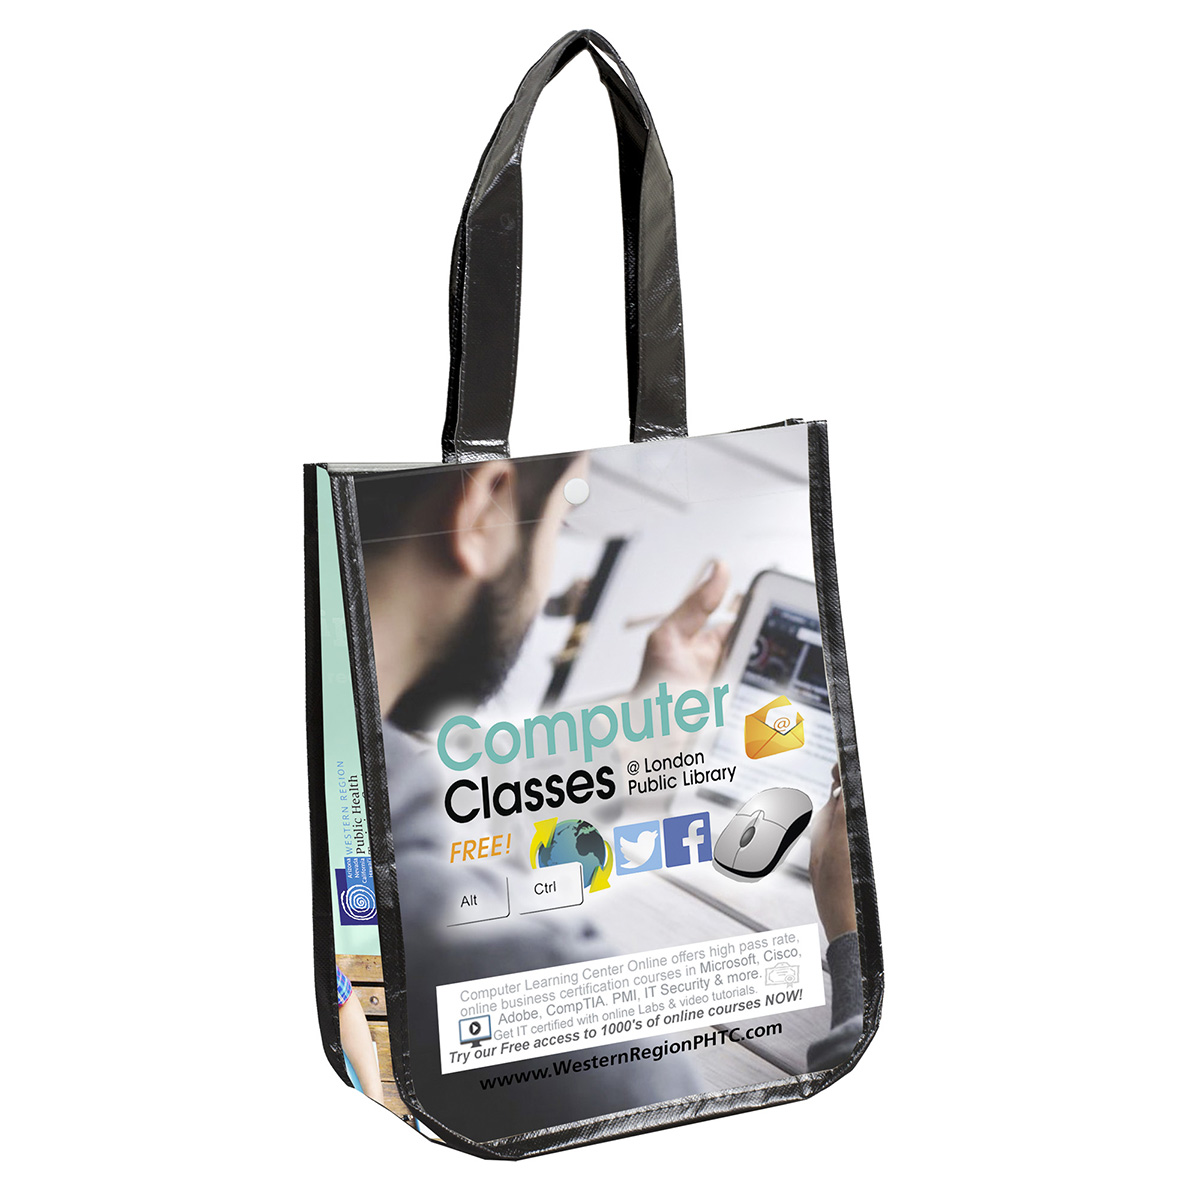 9-1/4" W x 12" H - "LAUREN" Small Non-Woven Full Color Laminated Wrap Carry All Tote and Shopping Bag